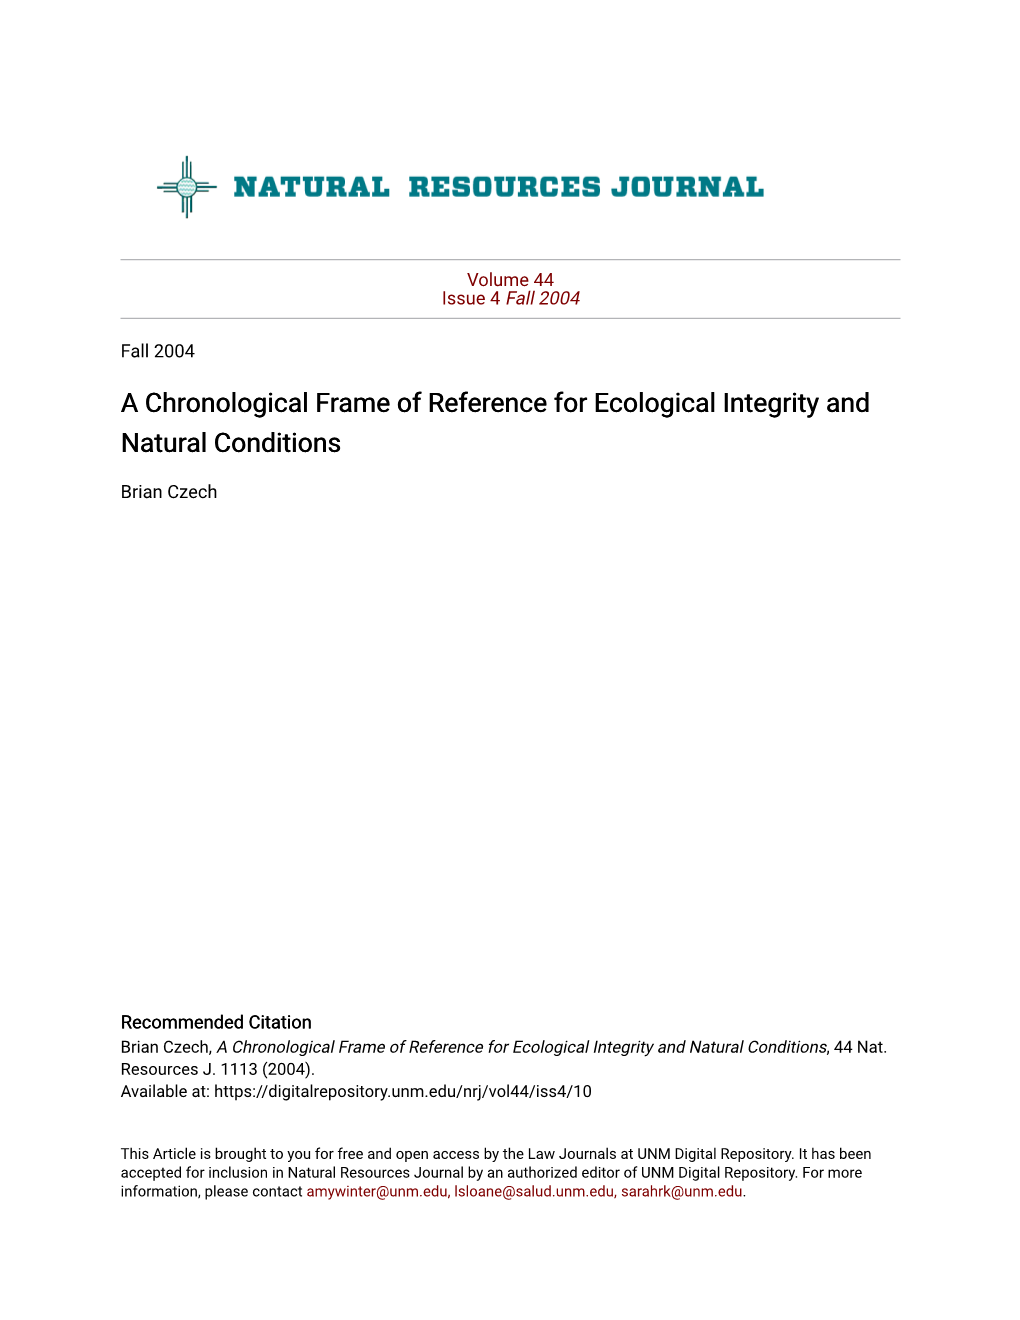 Ecological Integrity and Environmental Health